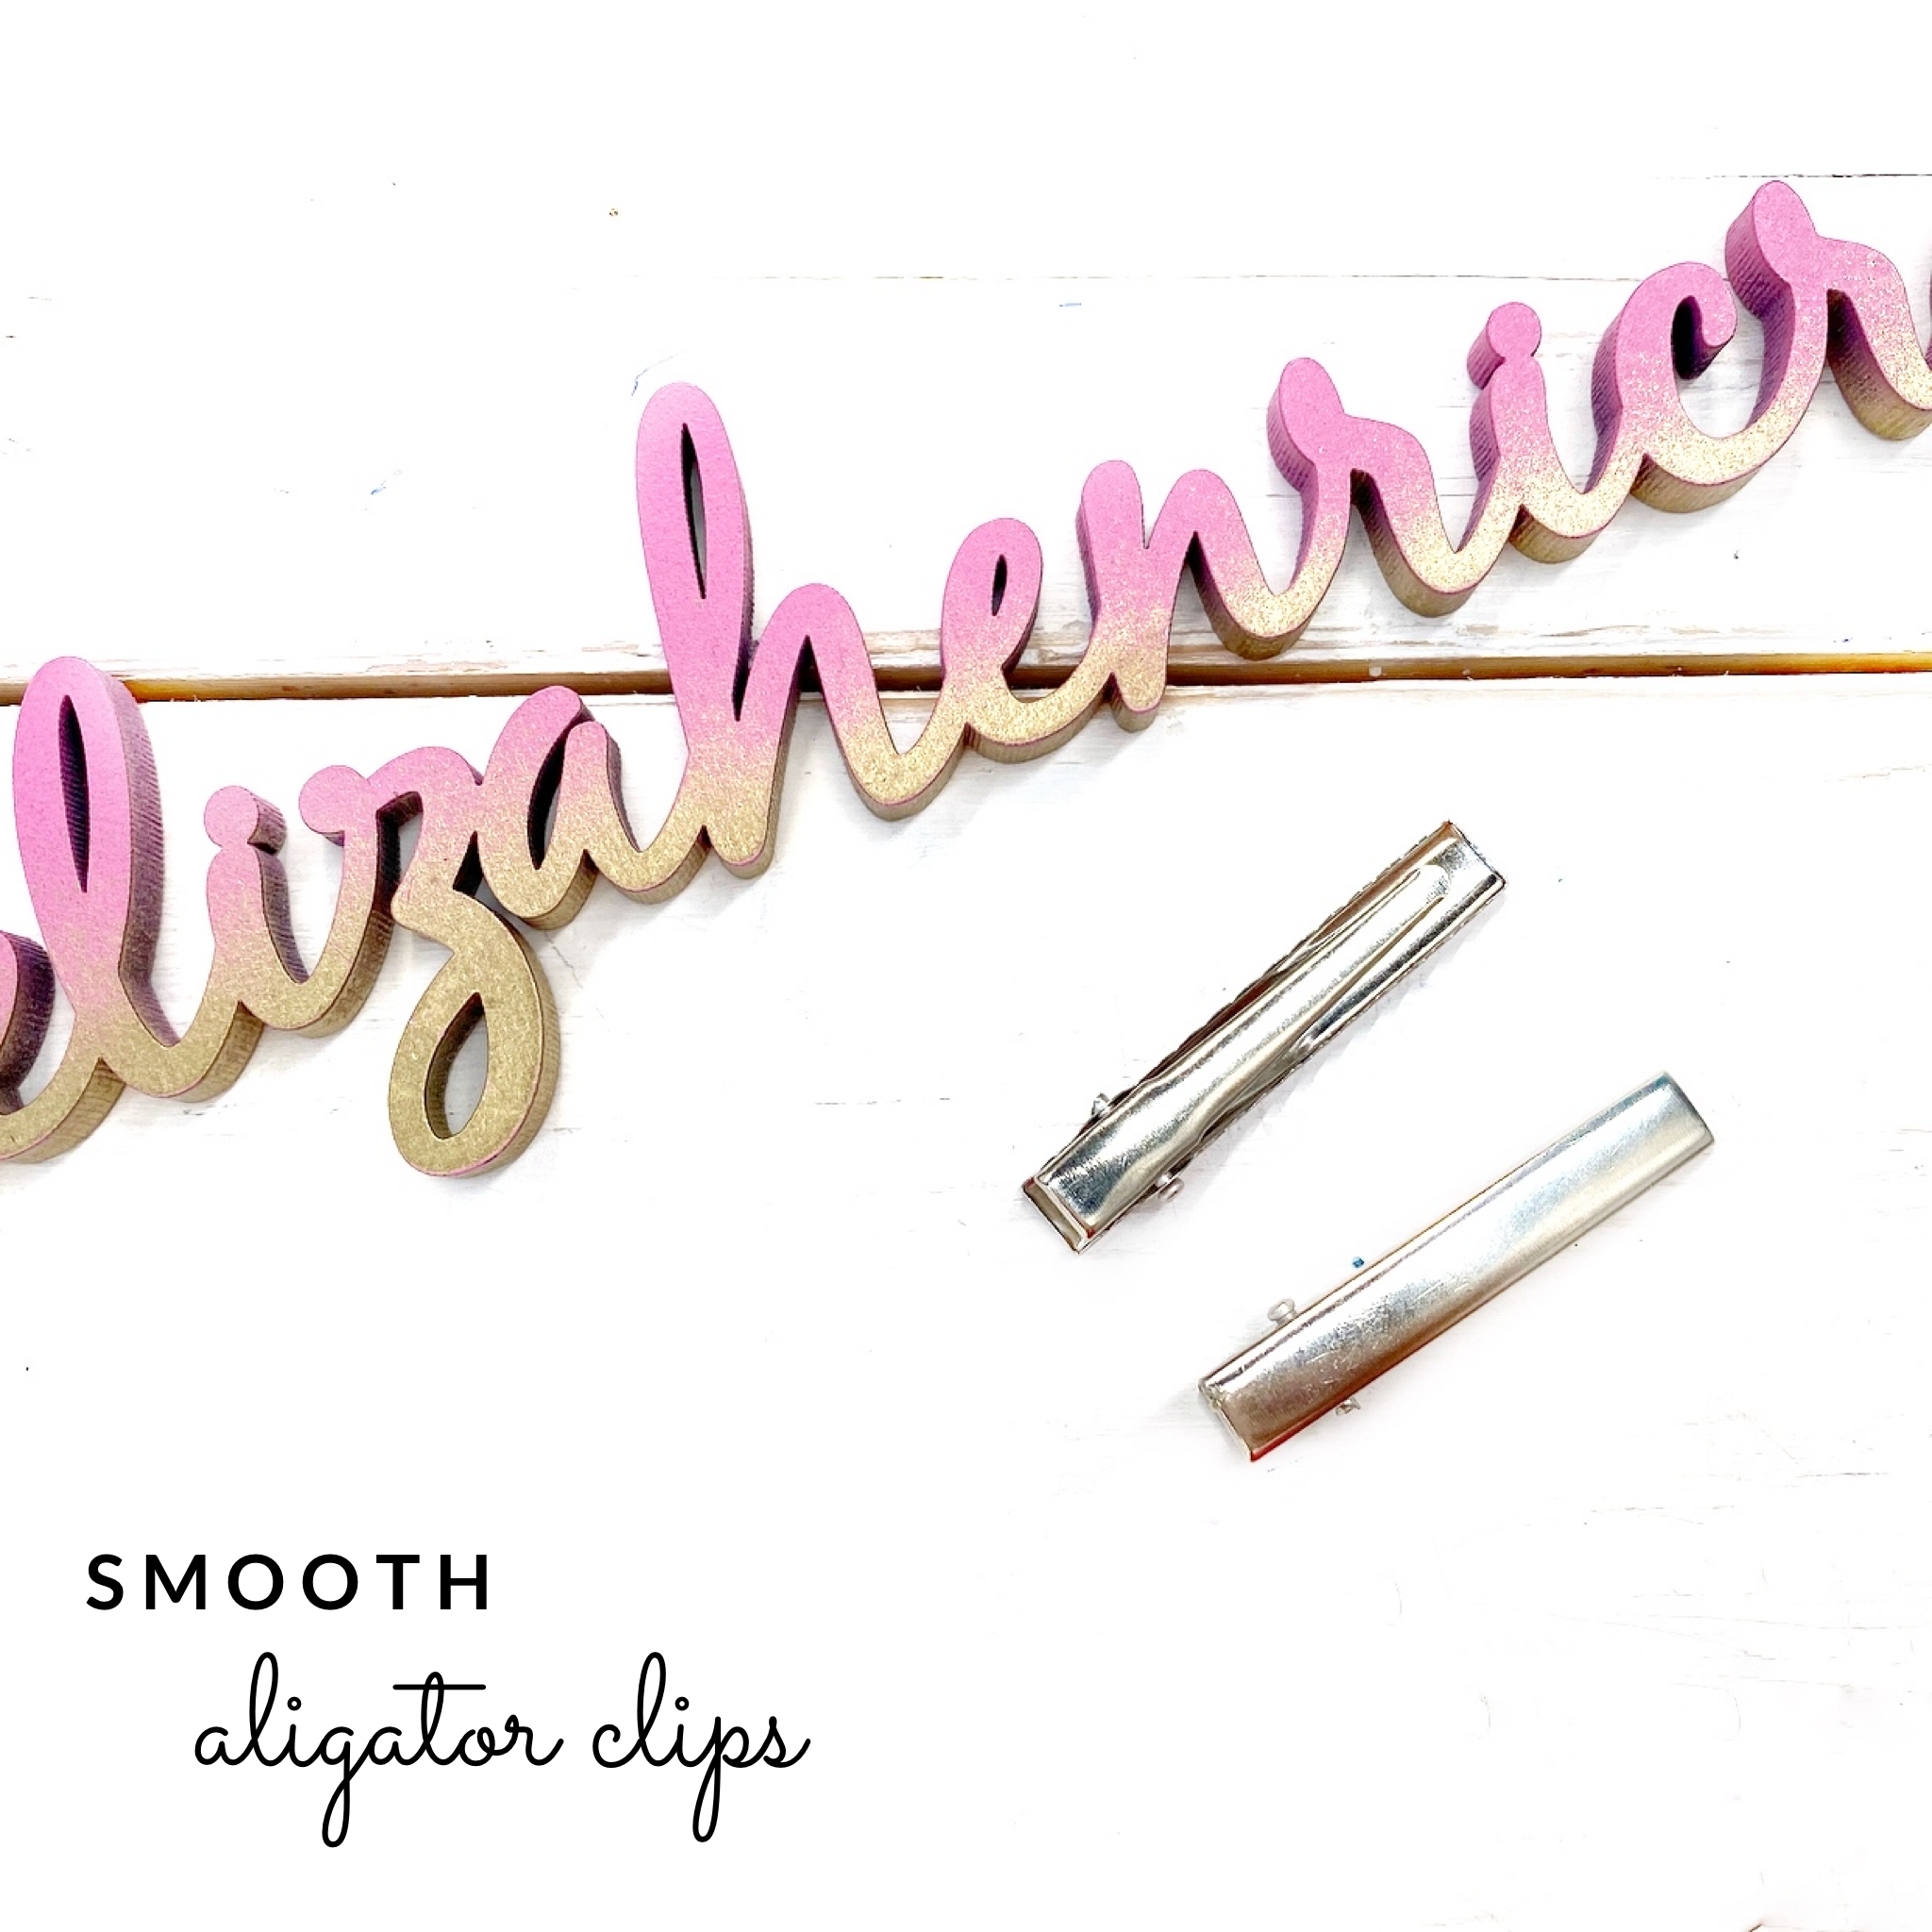 Smooth Hair Alligator Clips with teeth- Pack of 10 - 32mm, 40mm, 45mm, 55mm, 65mm, 75mm, 80mm or 95mm